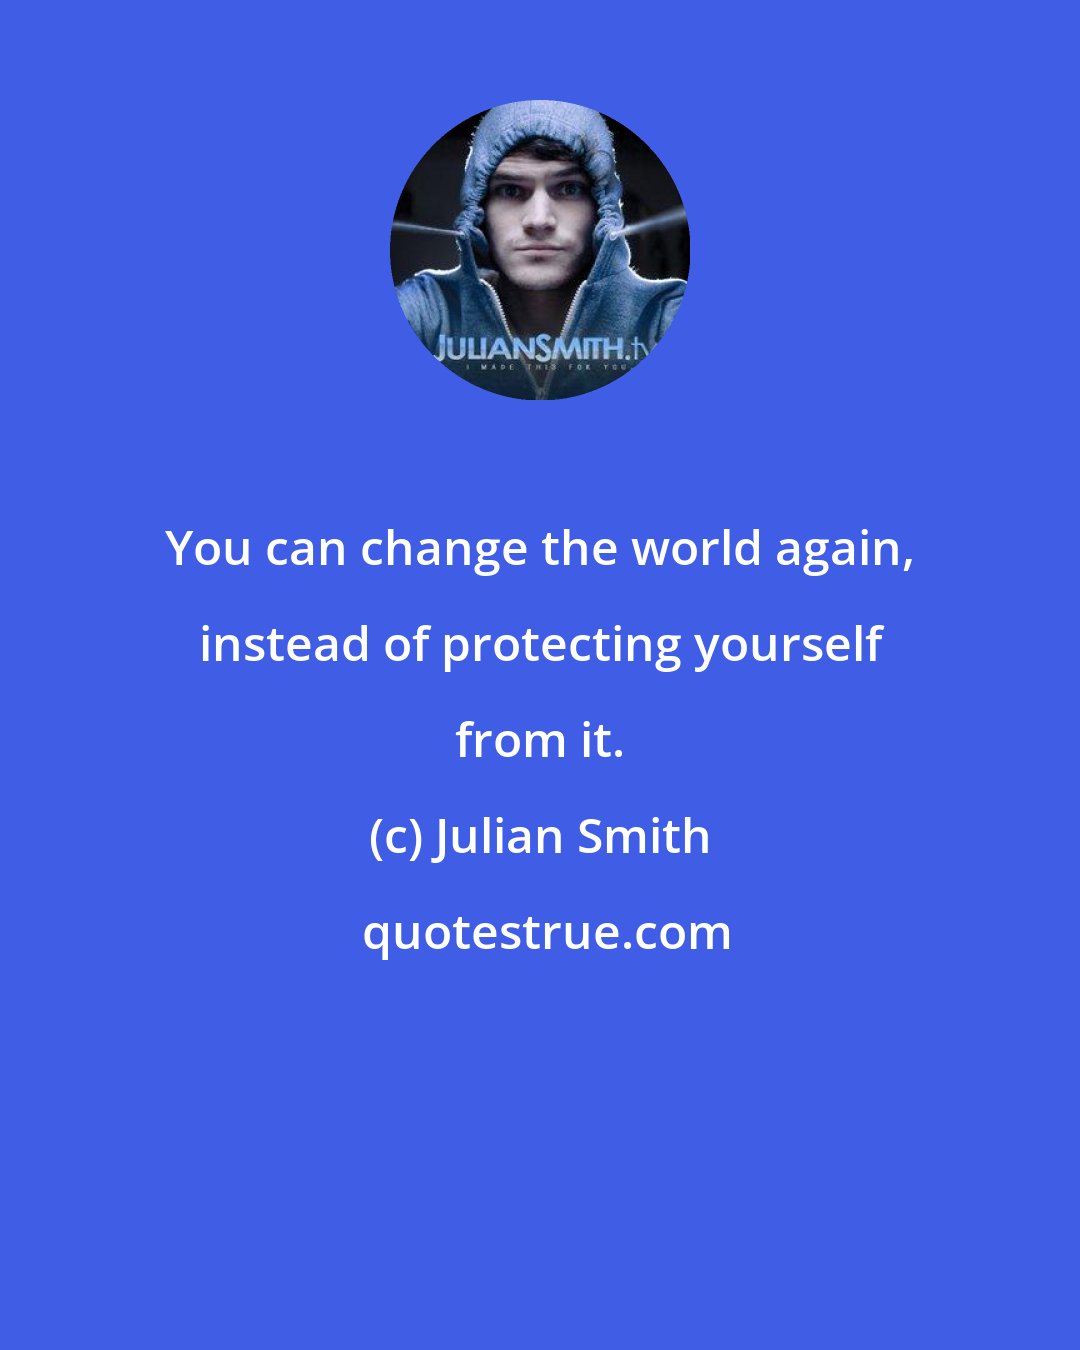 Julian Smith: You can change the world again, instead of protecting yourself from it.